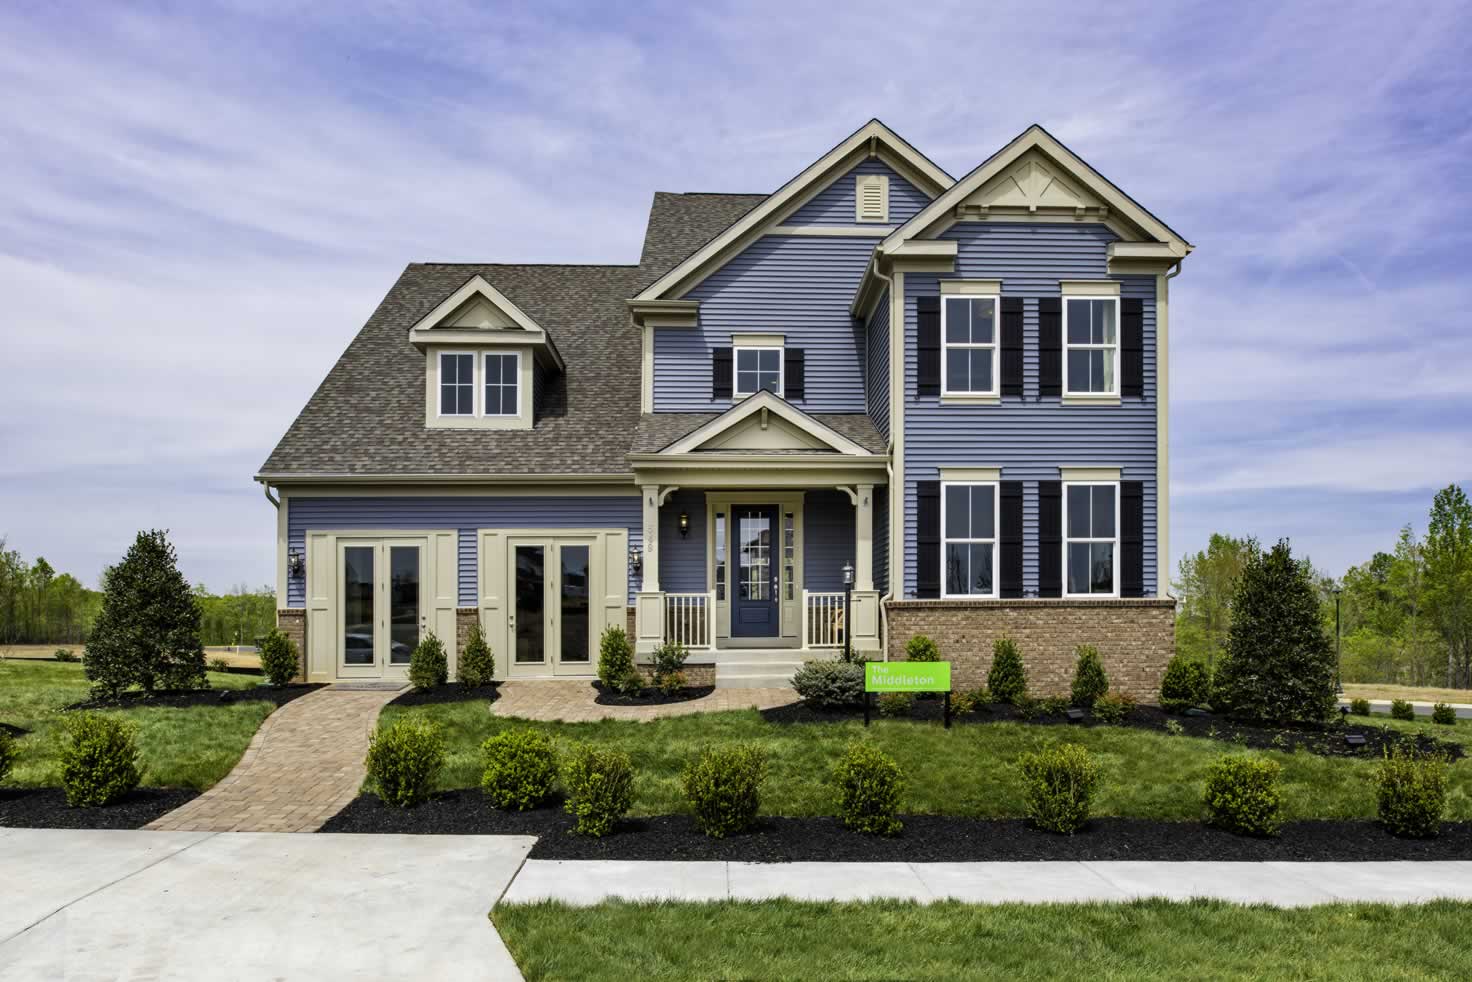 Build a Home on Your Lot | Middleton Model from Stanley Martin Custom Homes